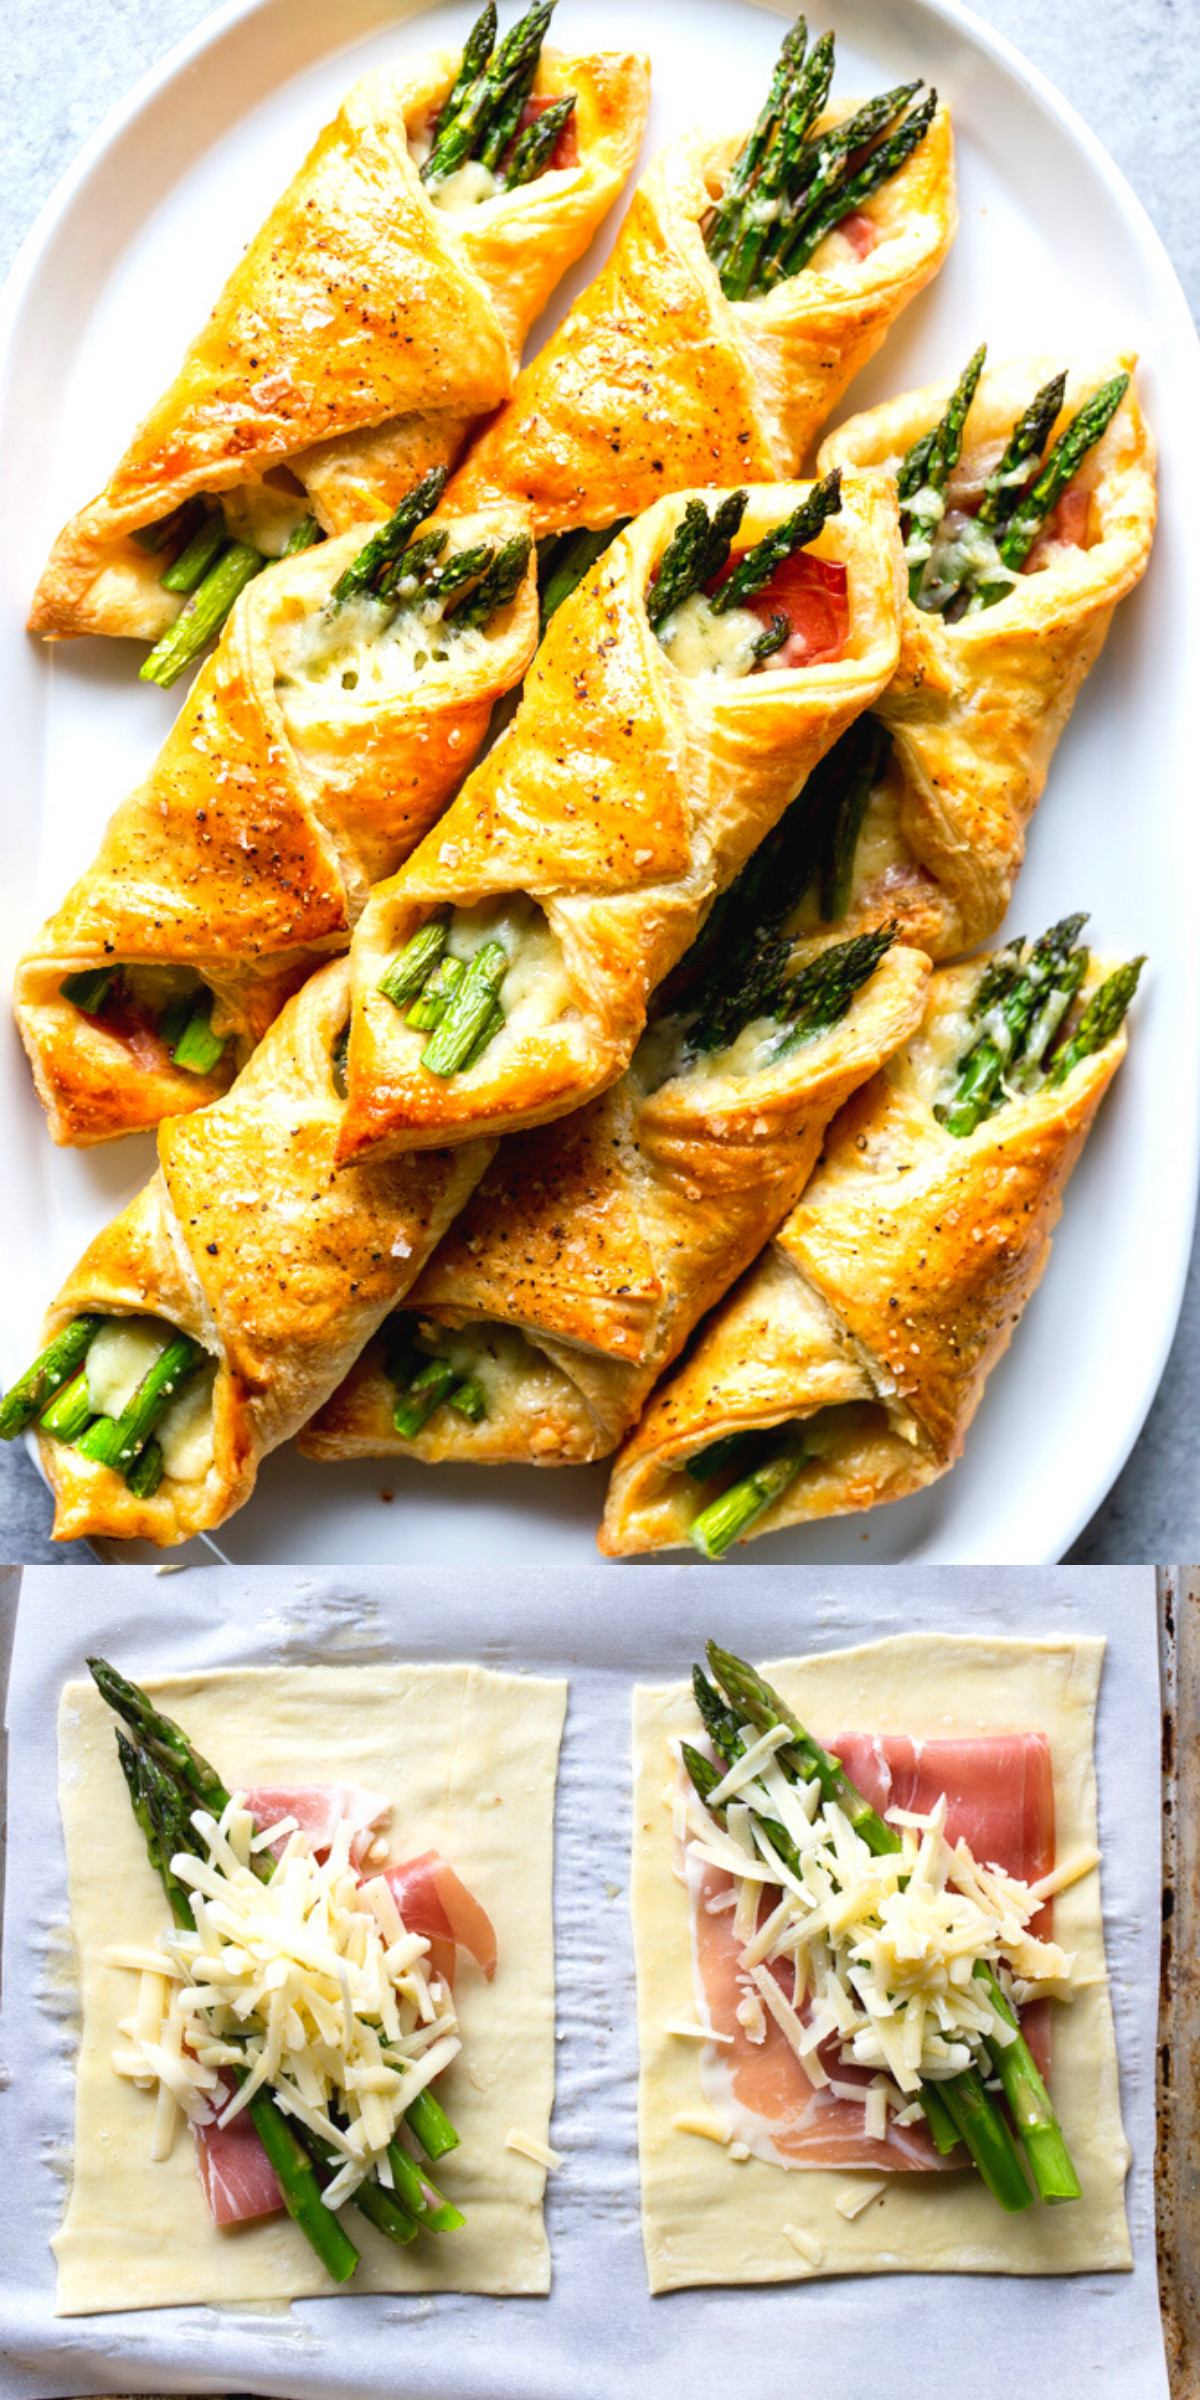 Puff Pastry Dinner Recipes
 Asparagus Puff Pastry Bundles Recipe in 2020